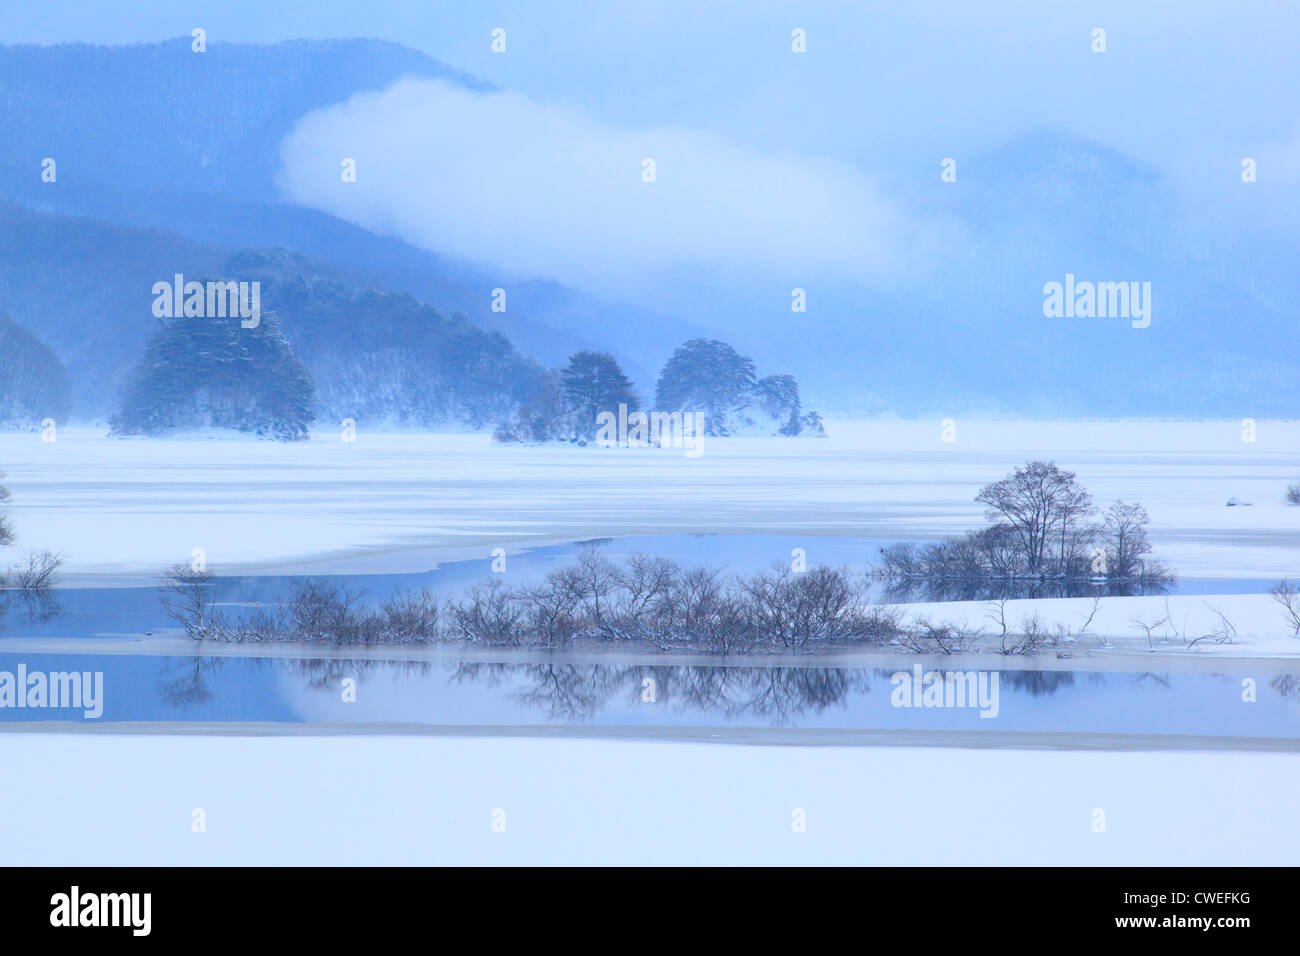 Frozen Lake And Smoke Rising From Lower Mountains In Background Stock Photo